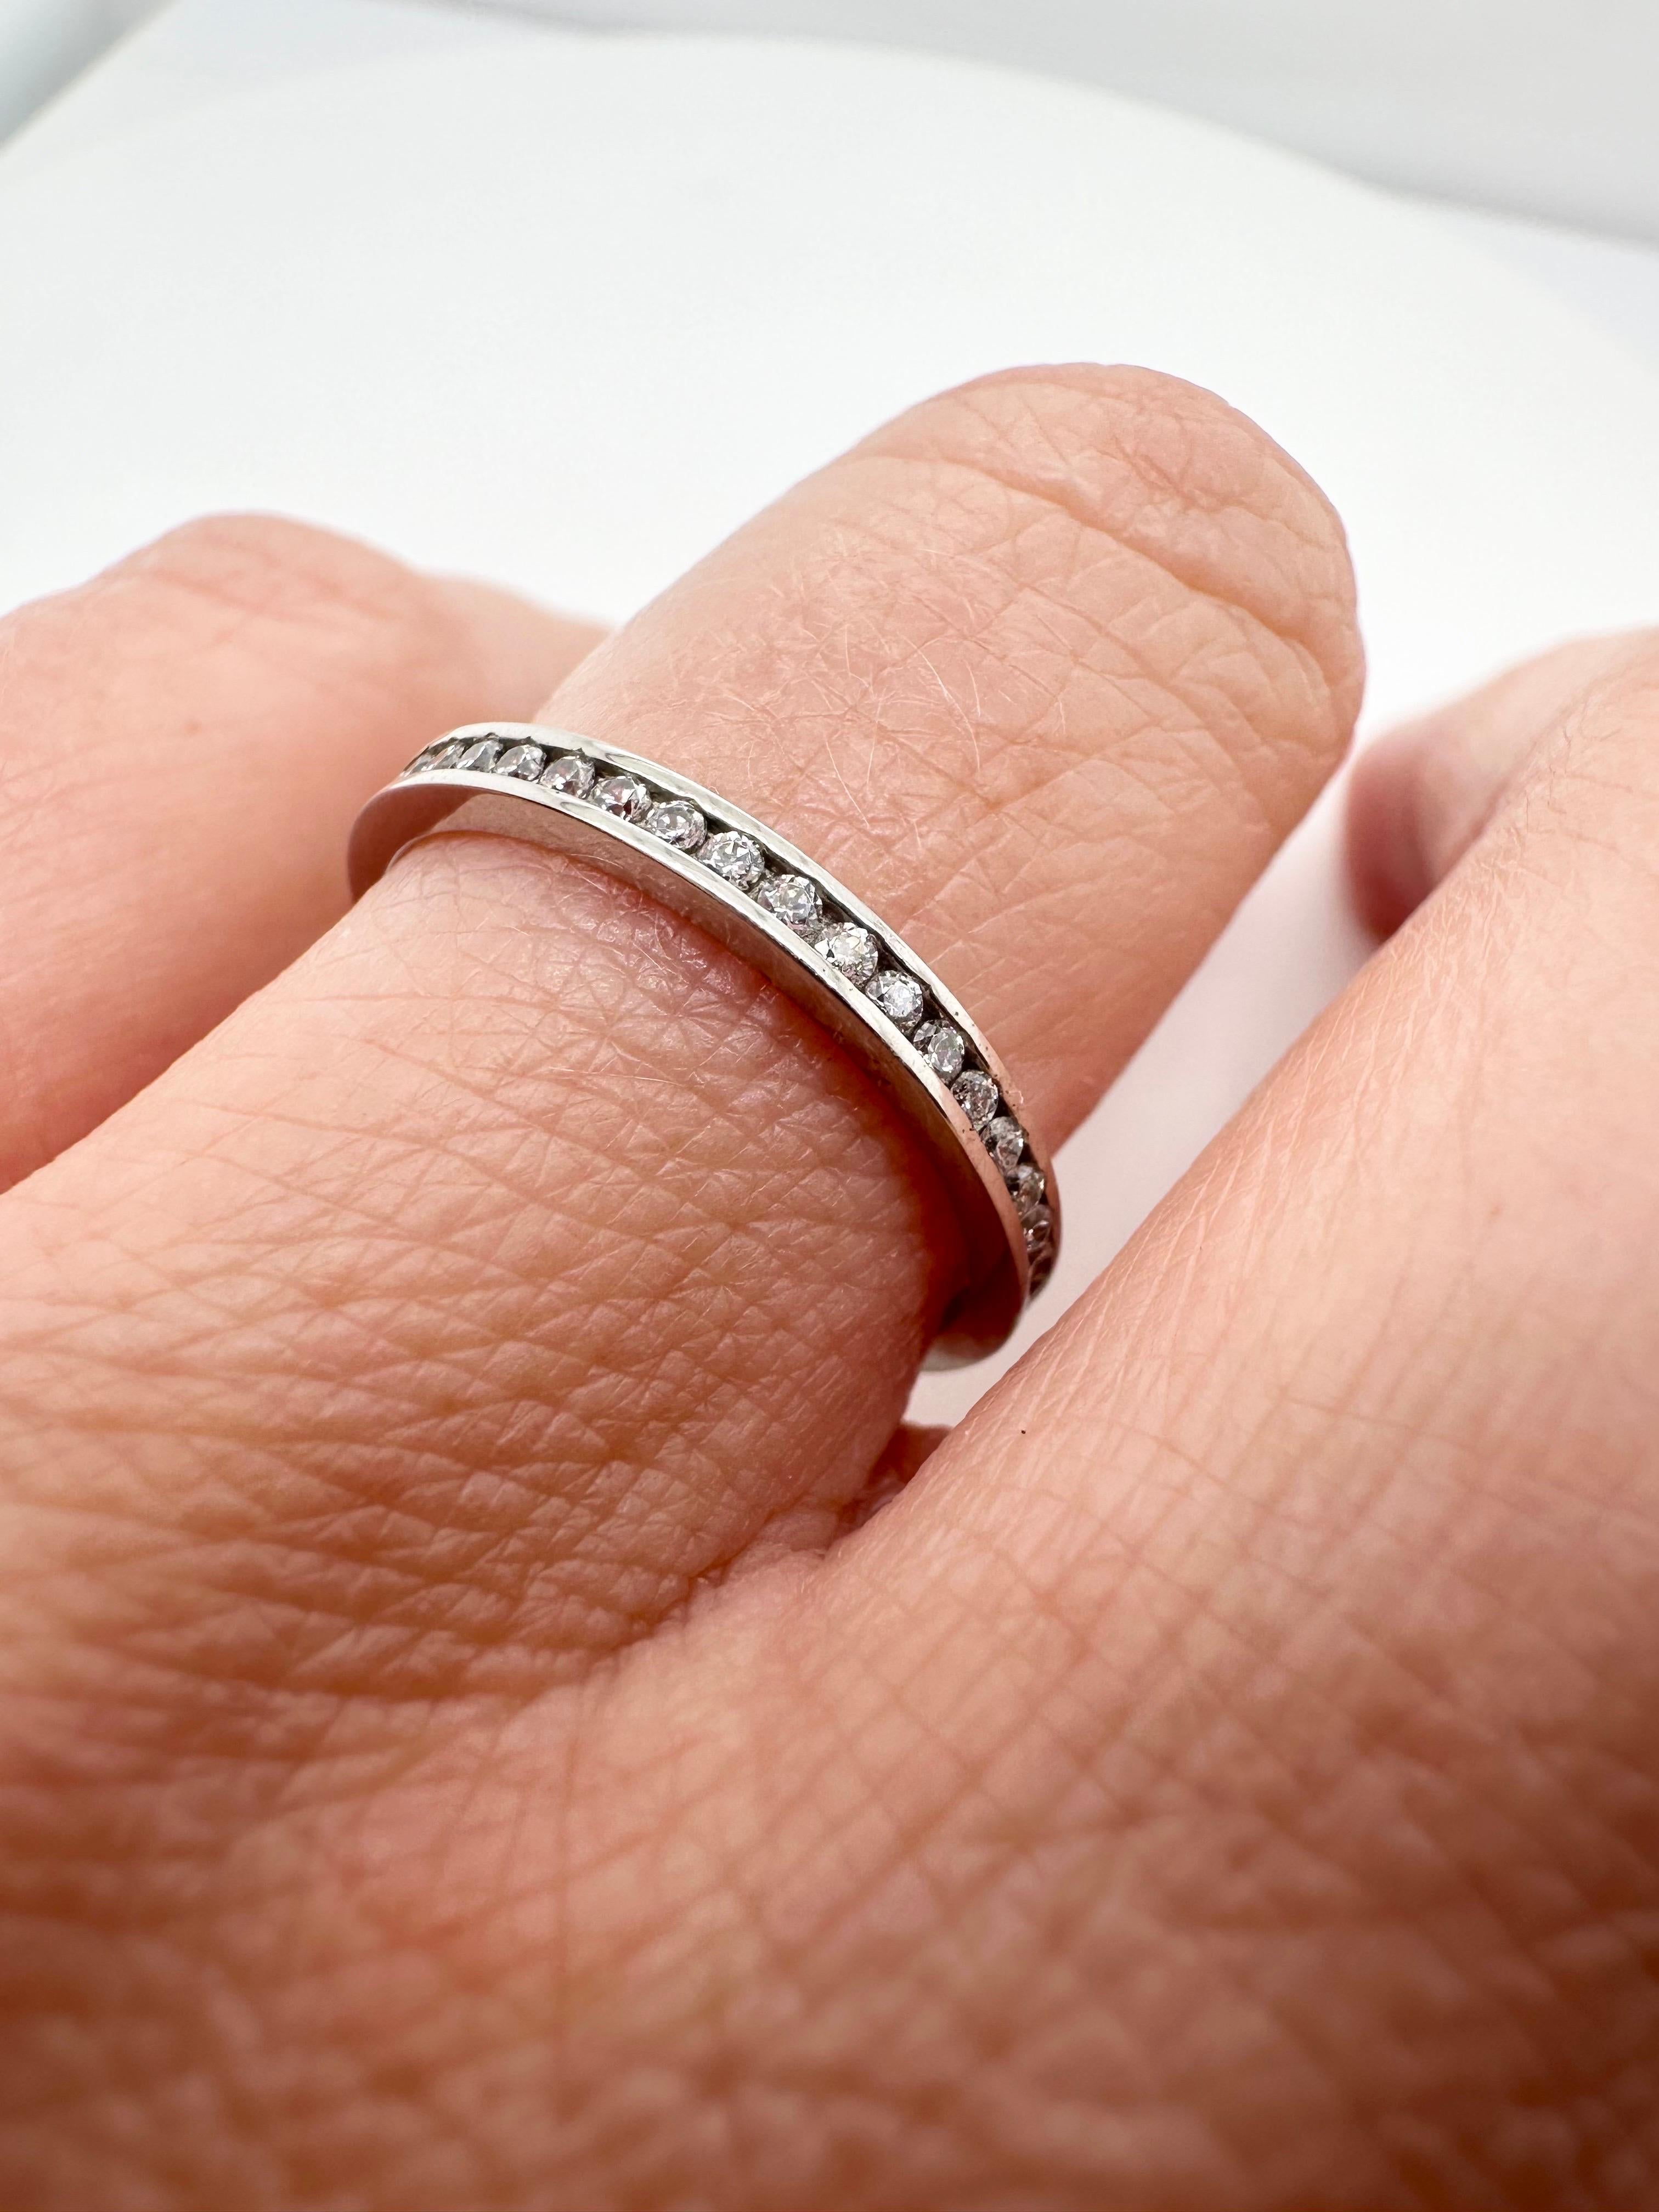 Diamond wedding band 10KT white gold marriage ring stacking ring size 7.5 In New Condition For Sale In Boca Raton, FL